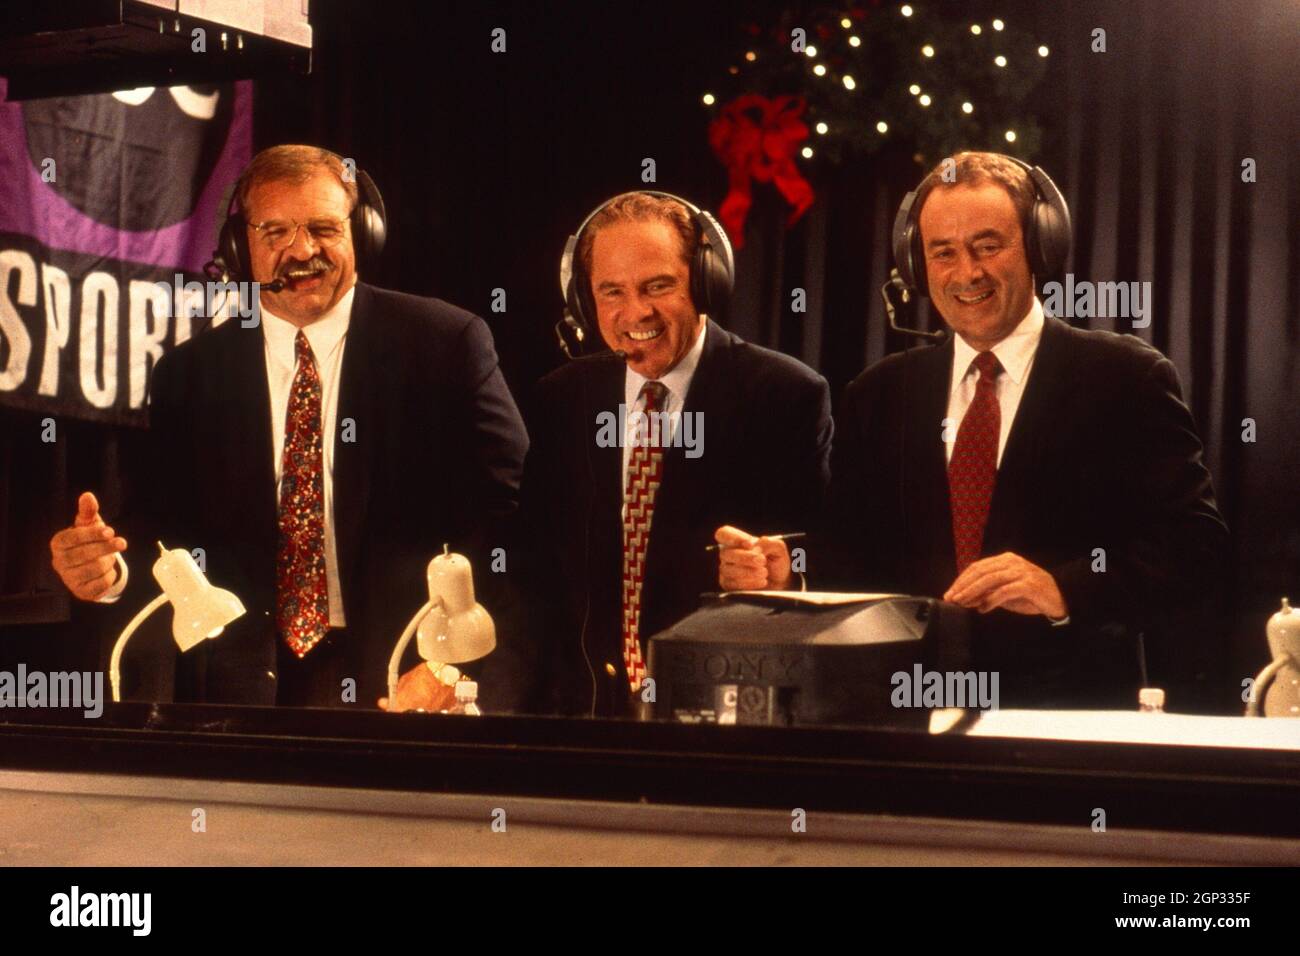 JERRY MAGUIRE, from left: Dan Dierdorf, Frank Gifford, Al Michaels, 1996. ©  TriStar Pictures / courtesy Everett Collection Stock Photo - Alamy